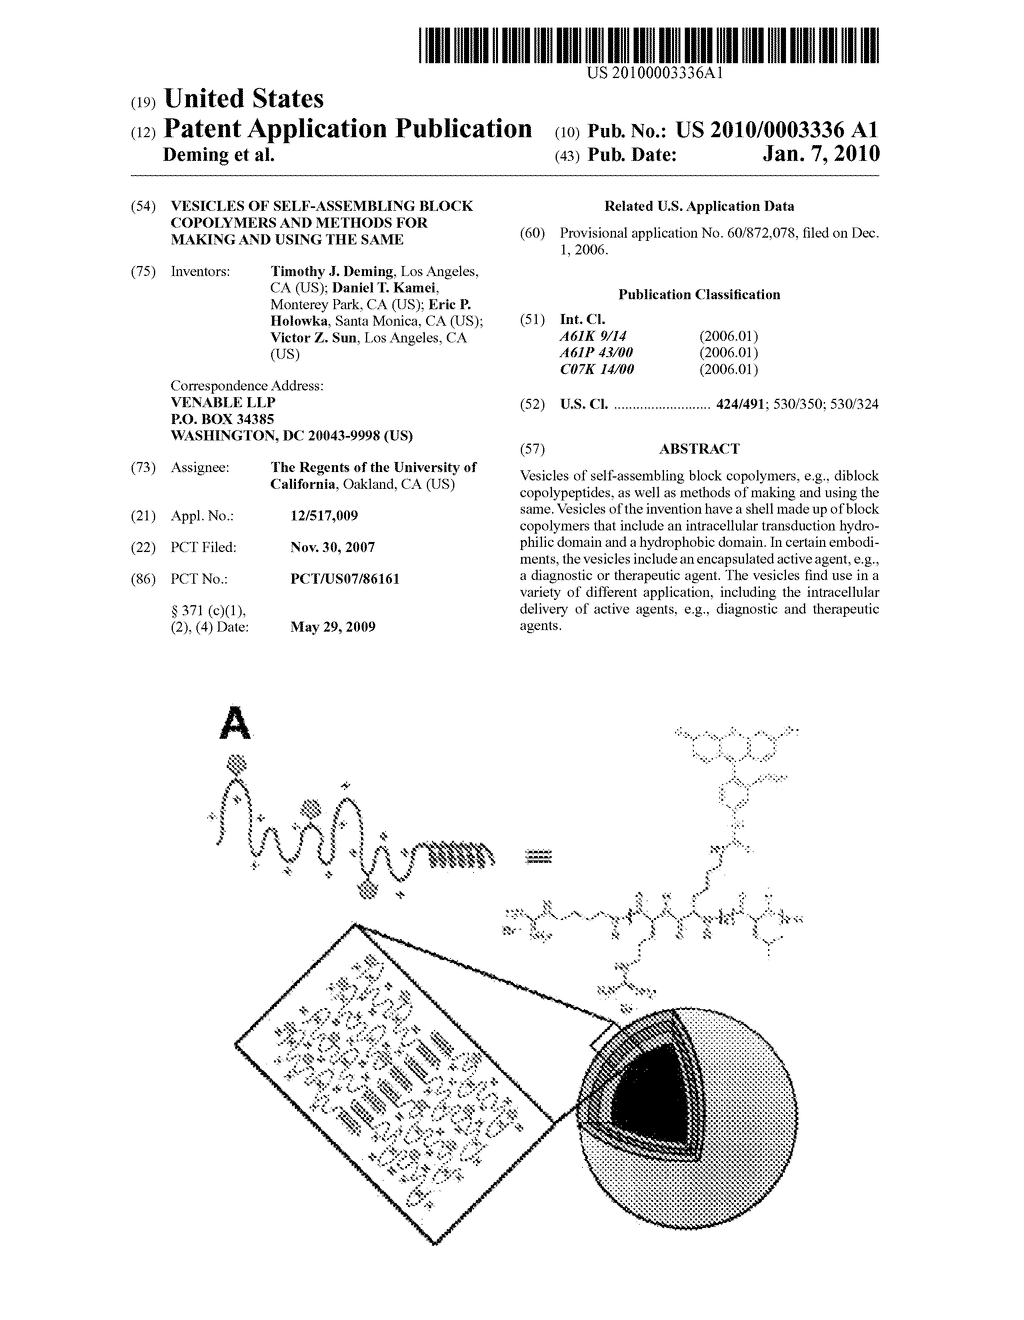 VESICLES OF SELF-ASSEMBLING BLOCK COPOLYMERS AND METHODS FOR MAKING AND USING THE SAME - diagram, schematic, and image 01